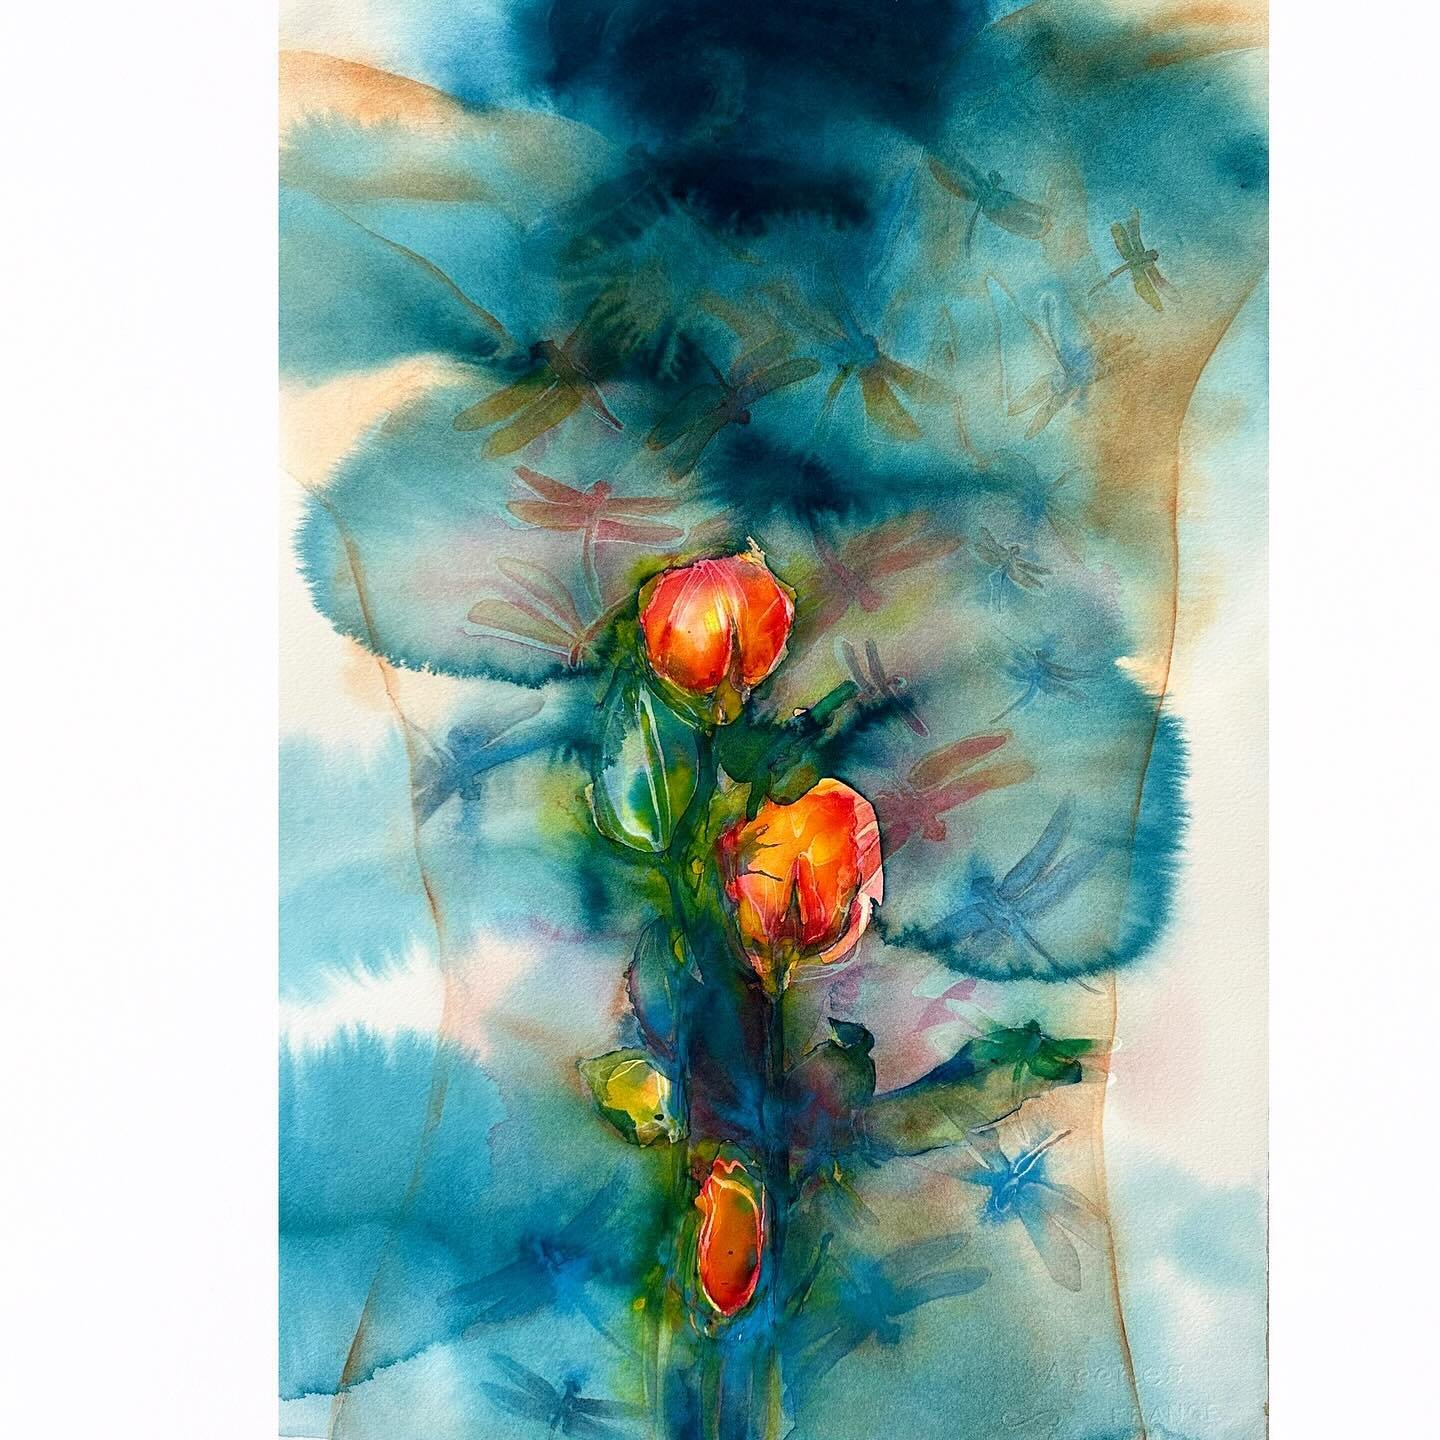 Happy to share this painting has sold and shipping to Michigan.

There is no better feeling than to know that someone will be appreciating your work in their home.

I am grateful to be painting in watercolor and bringing my ideas into the world.

Ros